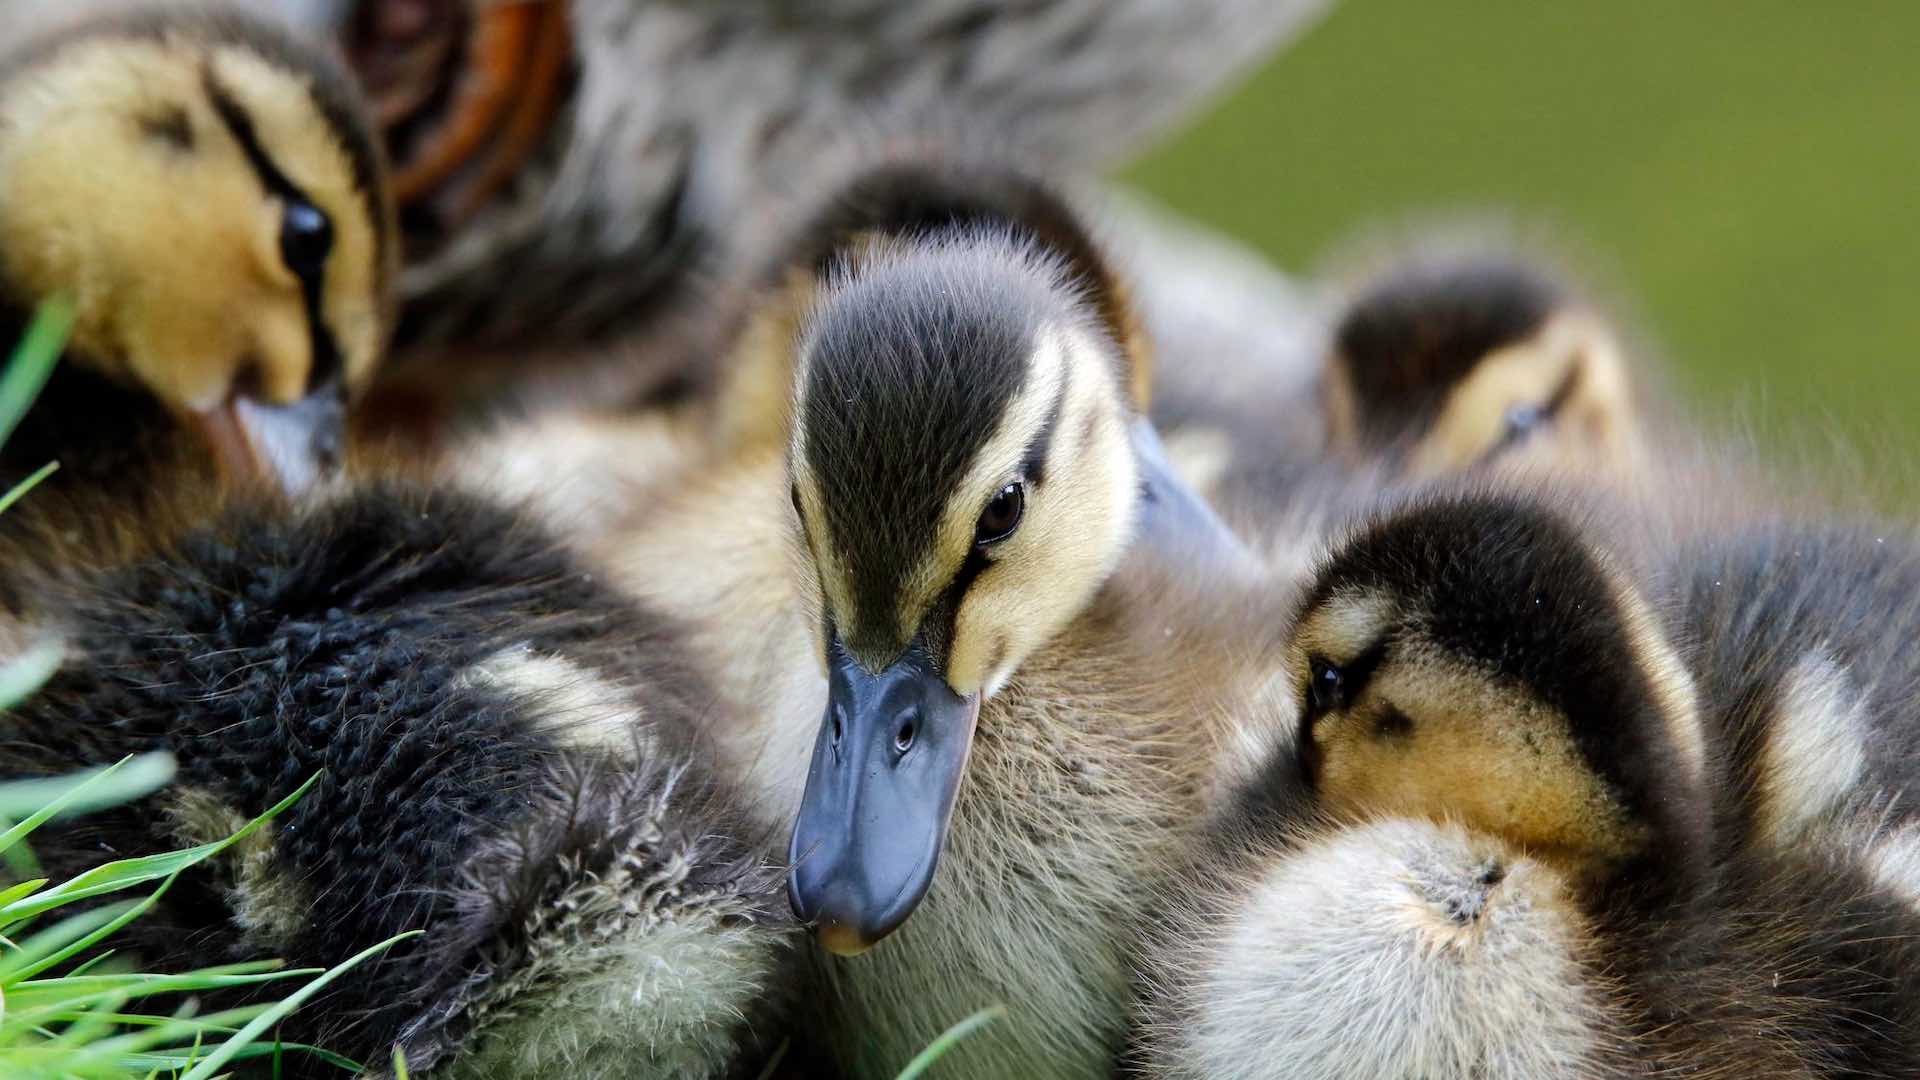 64 million ducks in France to get vaccinated to shield national delicacy